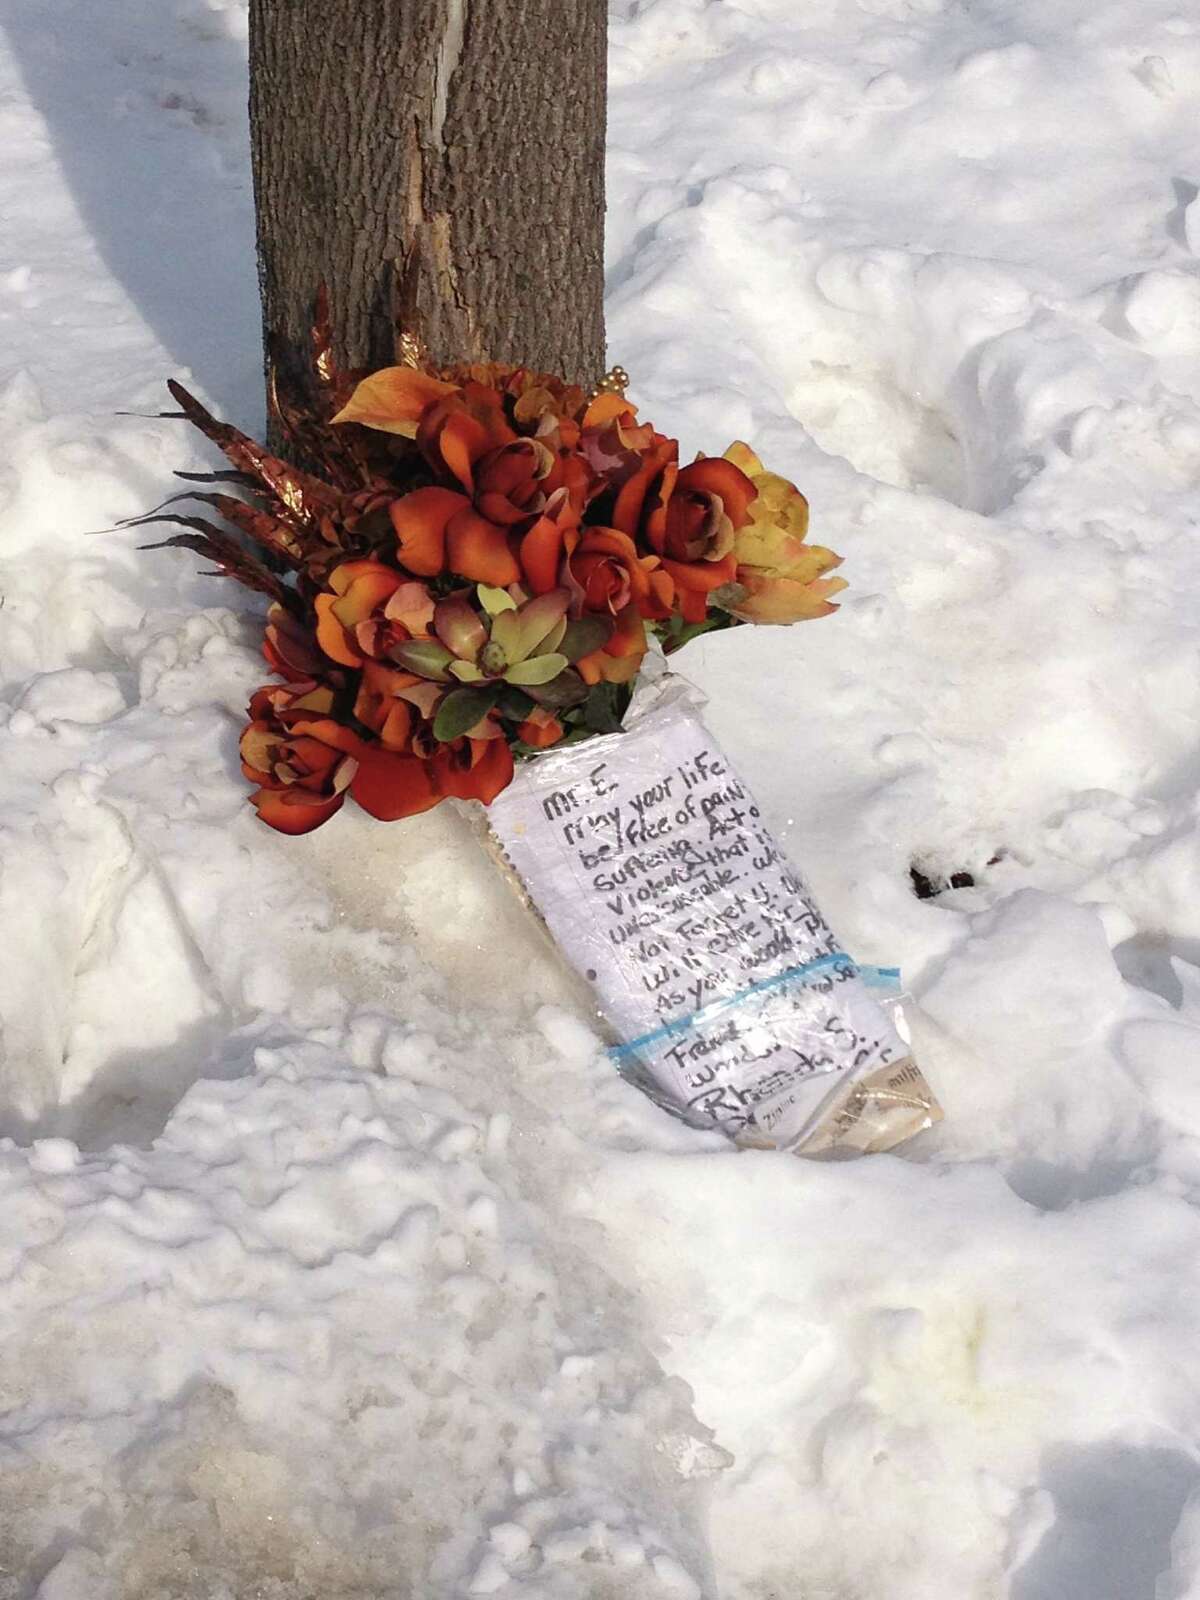 Flowers and a note set outside the Woodside Drive home of Richard Englander, who police say was killed Thursday by his recently hired home health aide. (Bryan Fitzgerald/Times Union)